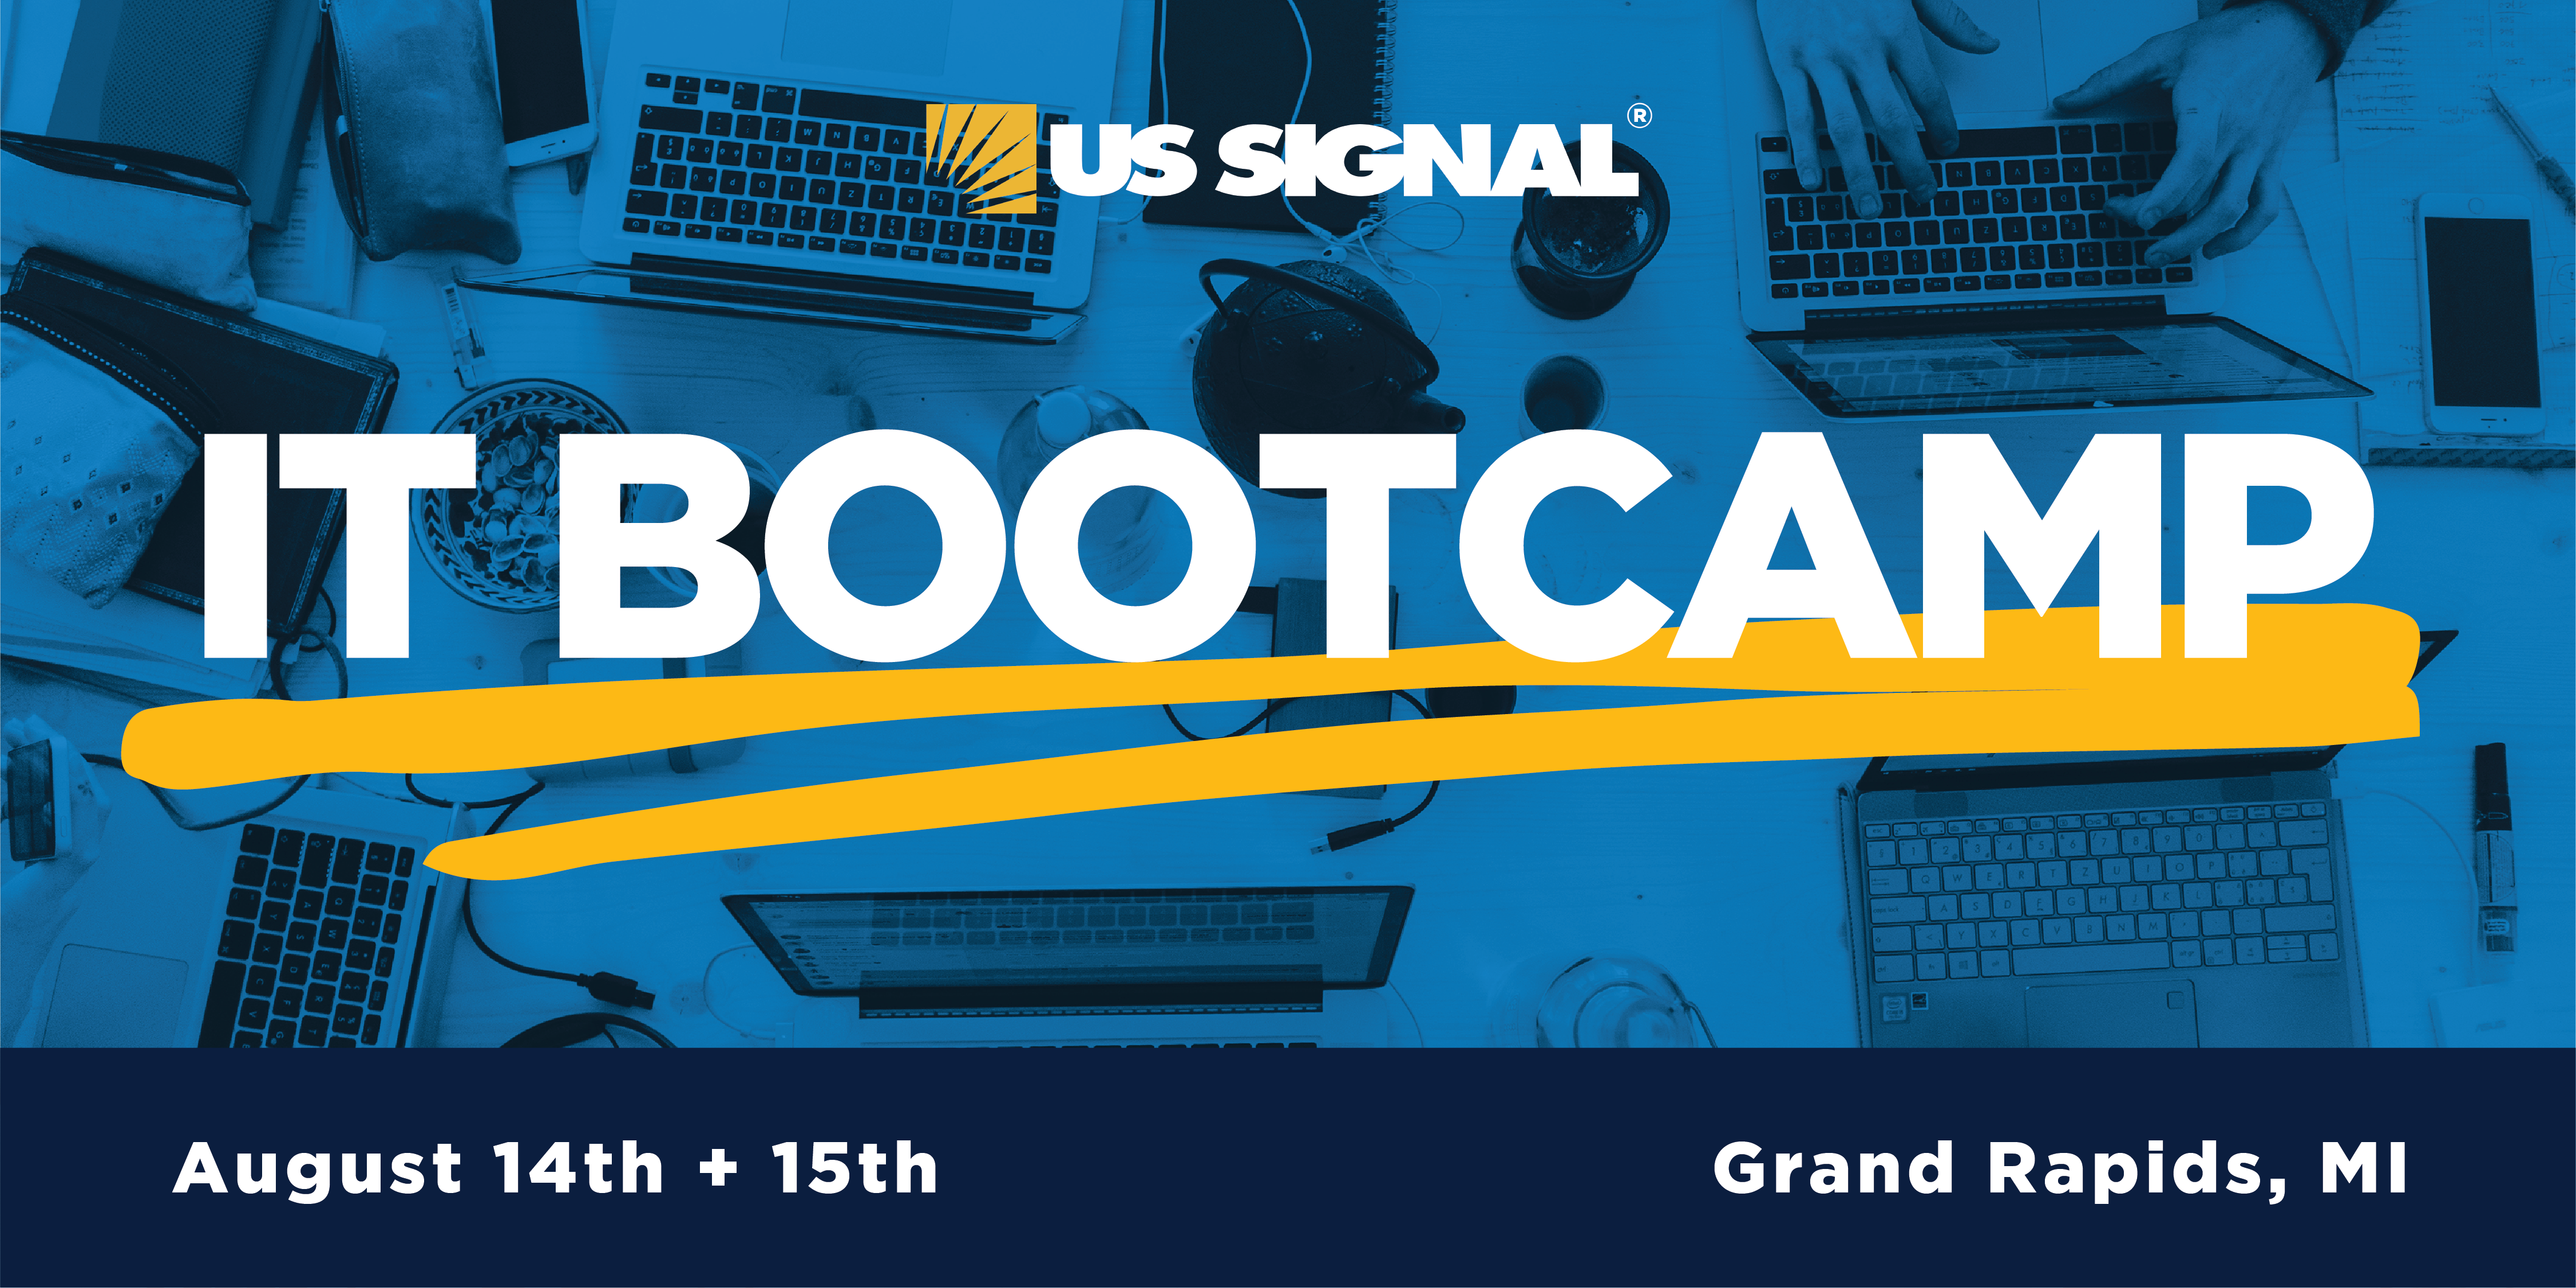 IT Bootcamp - Presented by US Signal